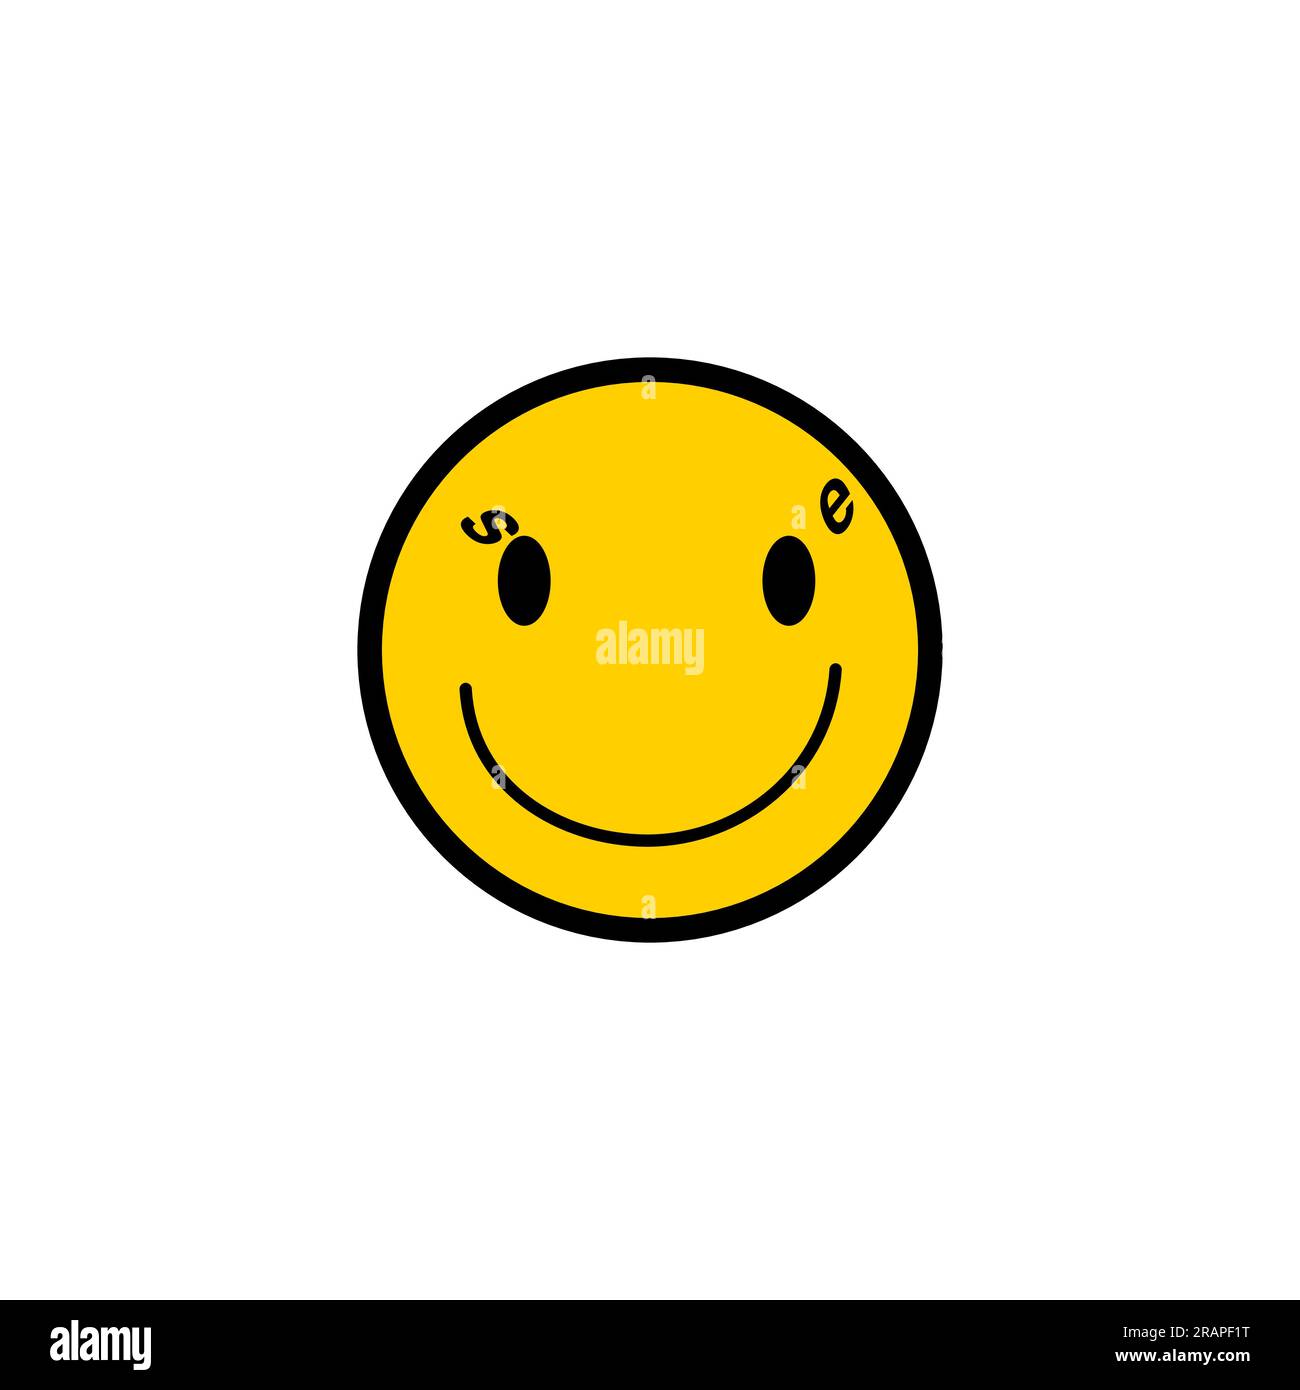 Smiling Emoji - Simple Happy Emoticon with Open Eyes on white Background - Vector Design Stock Vector